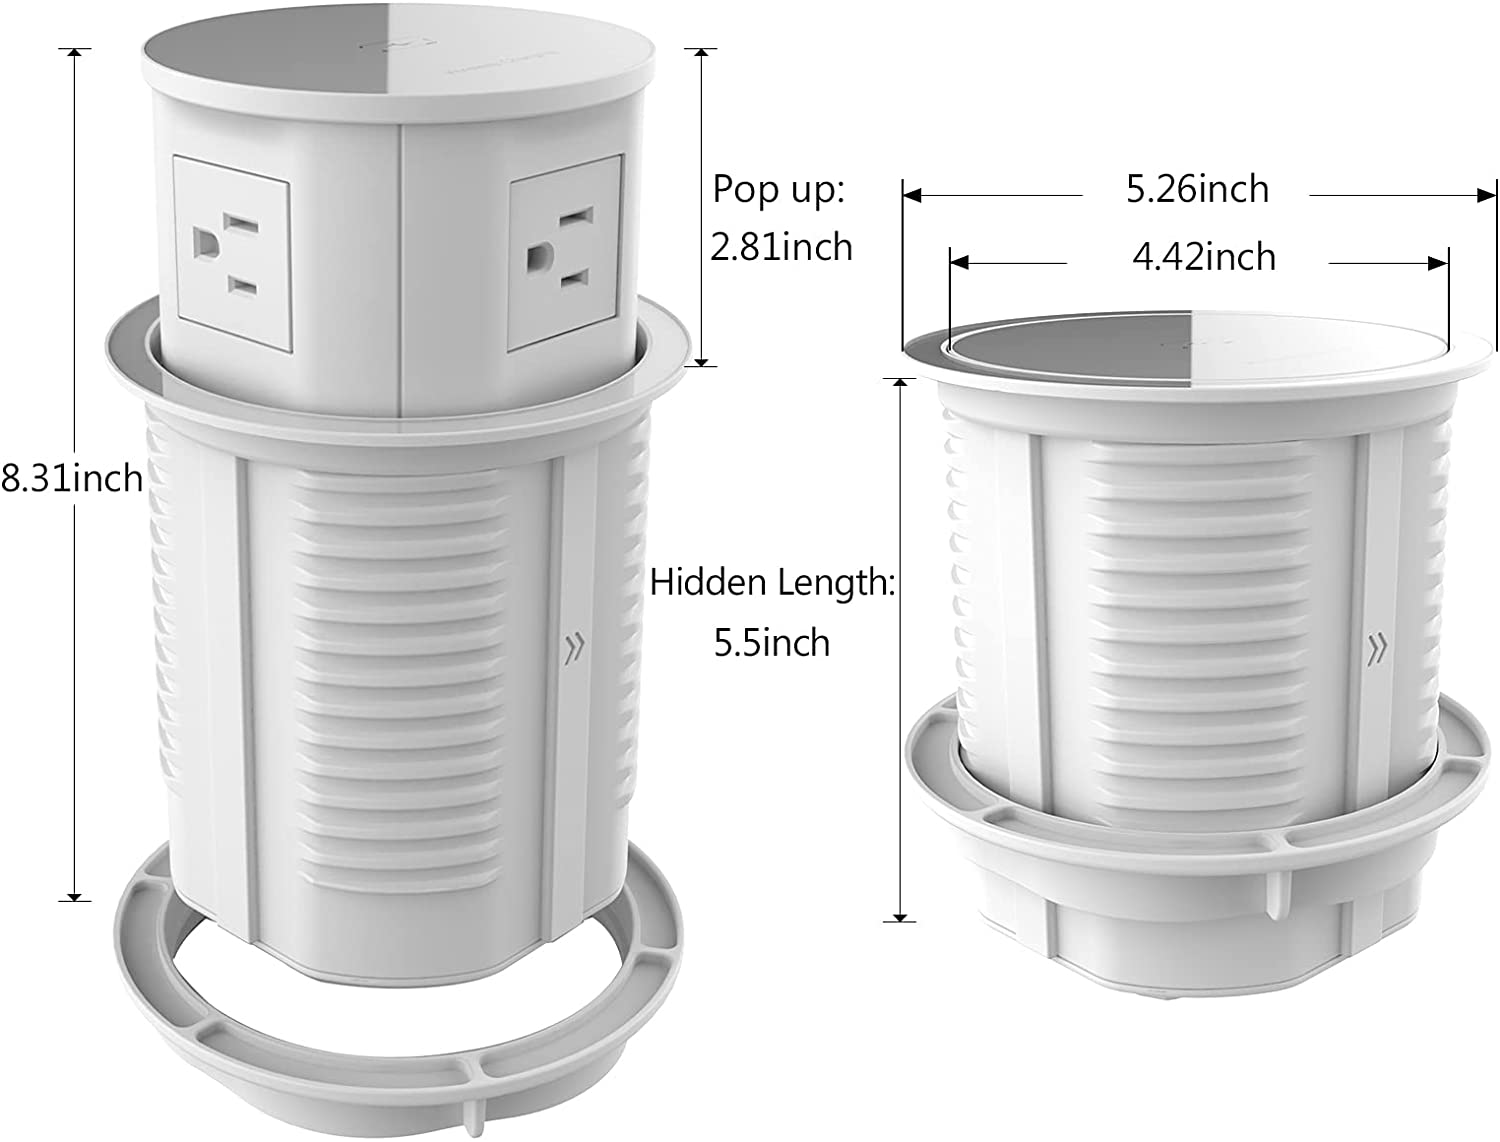 Compact Wireless Charging Kitchen Counter Pop Up With 4 Receptacles & 2 USB Ports - Sonic Electric